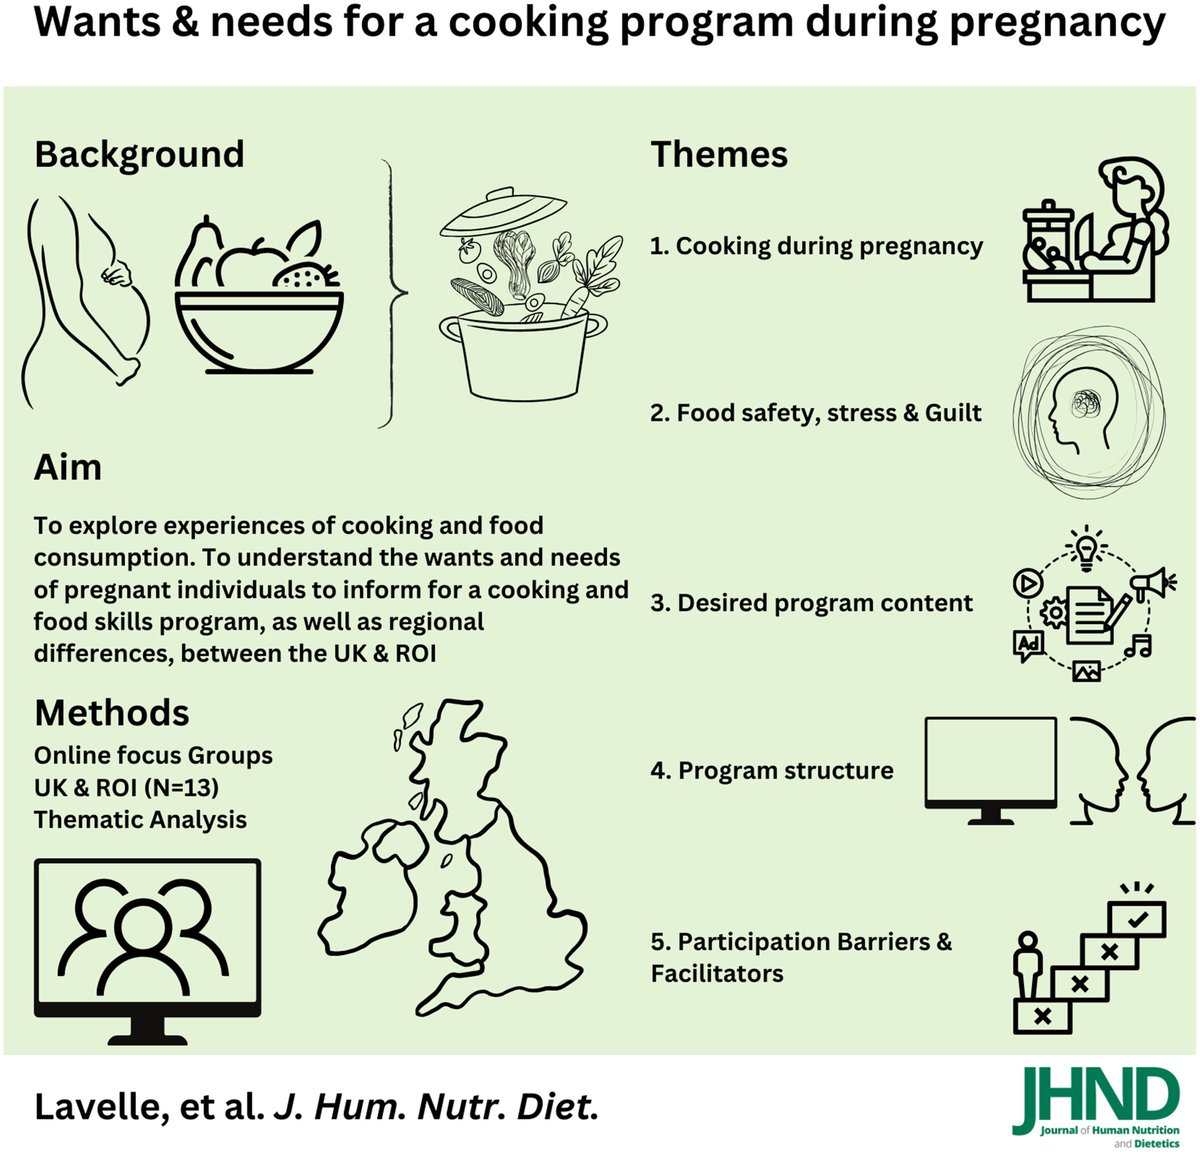 1st paper from my @The_ACU postdoctoral fellowship is published. There was support for an inclusive #cooking program focusing on broad food skills: planning, food storage, using leftovers & managing #pregnancy -specific physiological symptoms. 📖doi.org/10.1111/jhn.13…